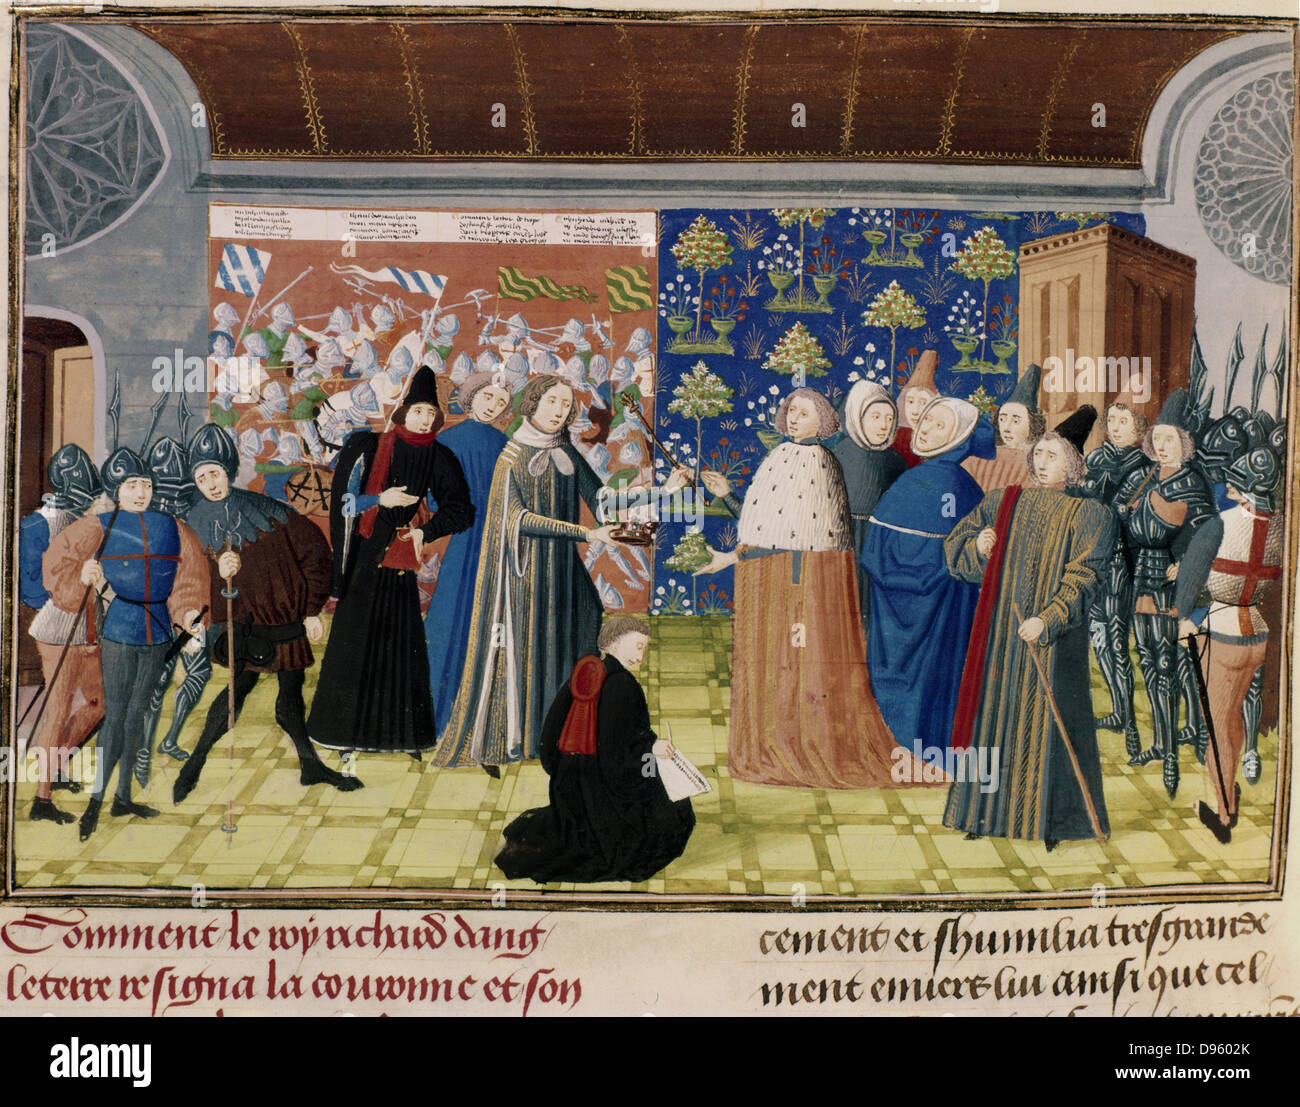 Froissart Chronicles (c.1333-c.1404). Richard II (1367-1400) King of England from 1377, surrendering the crown and sceptre to Lord Derby, 29 December 1399. Richard died, probably murdered, in Pontefract Castle early in 1400. Manuscript, British. Museum, London Stock Photo